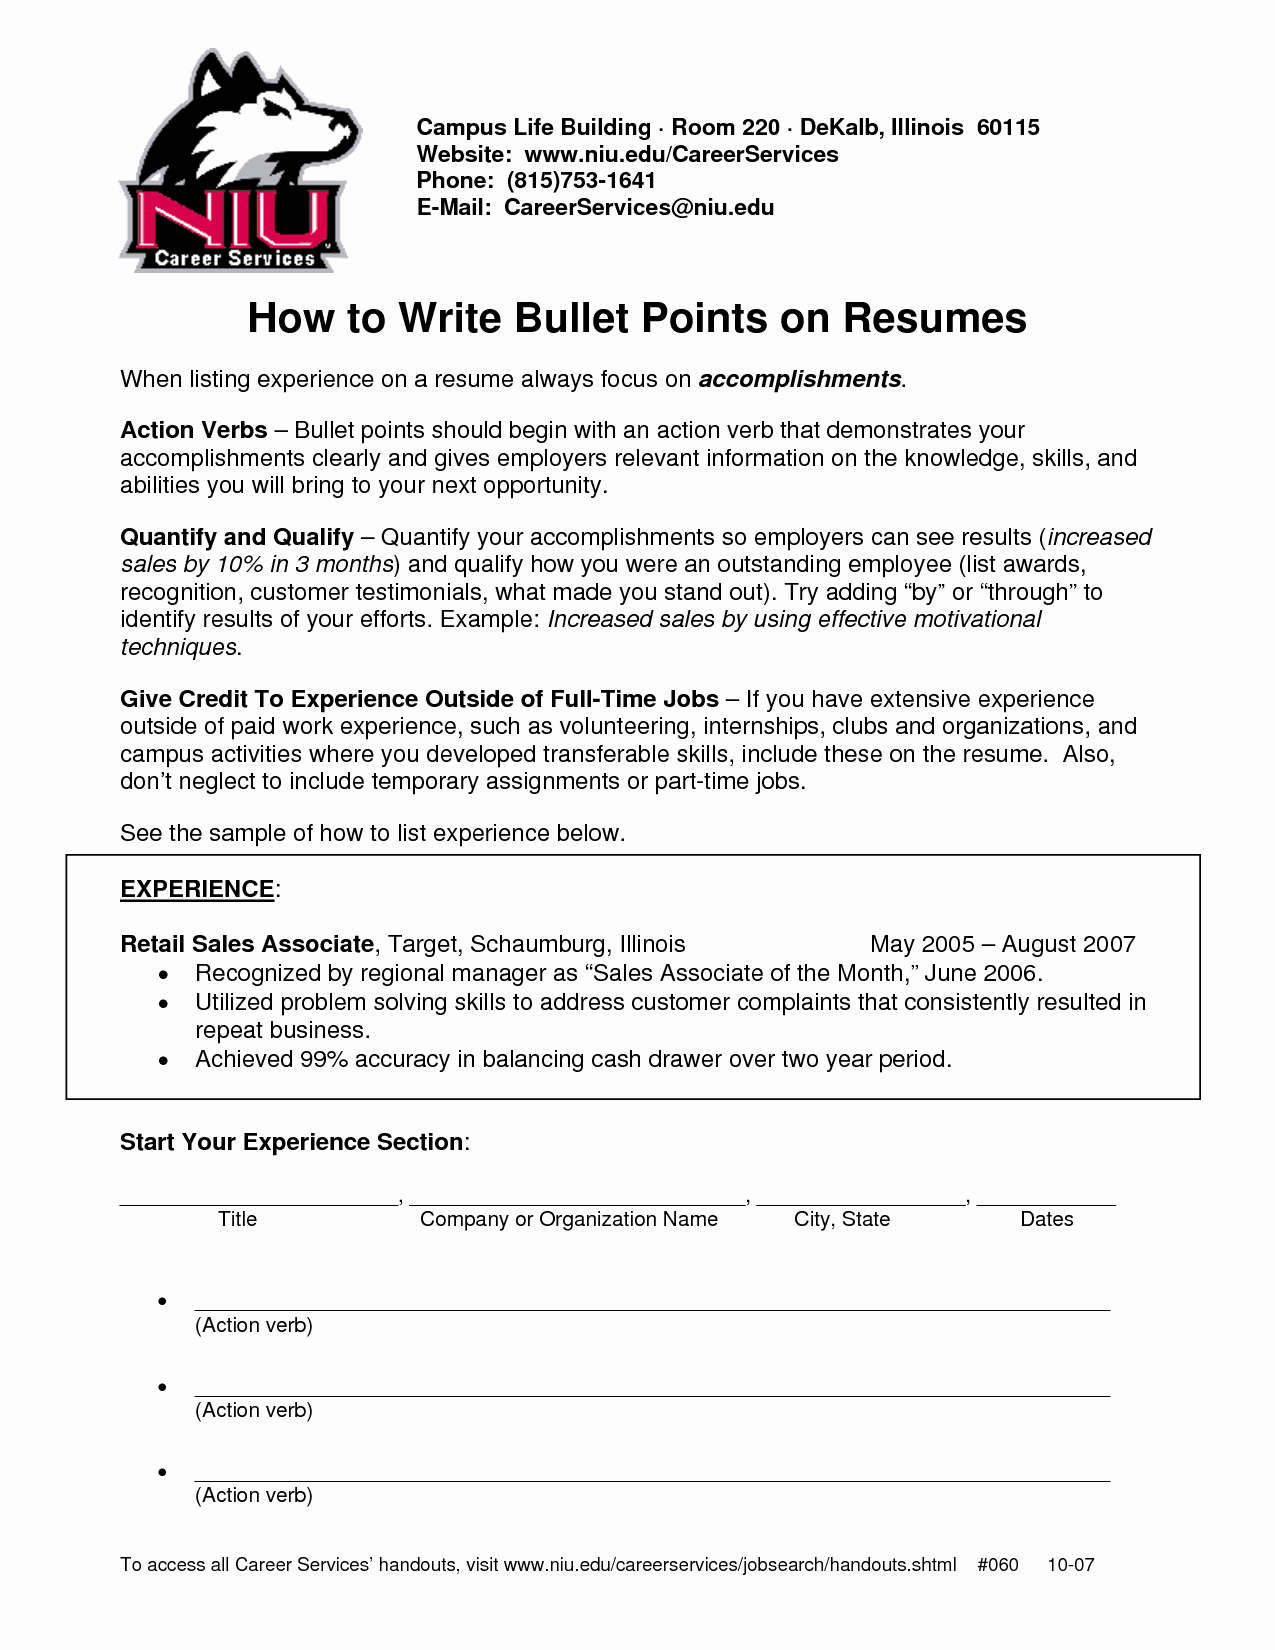 Resume Bullet Points Examples Resume Templates